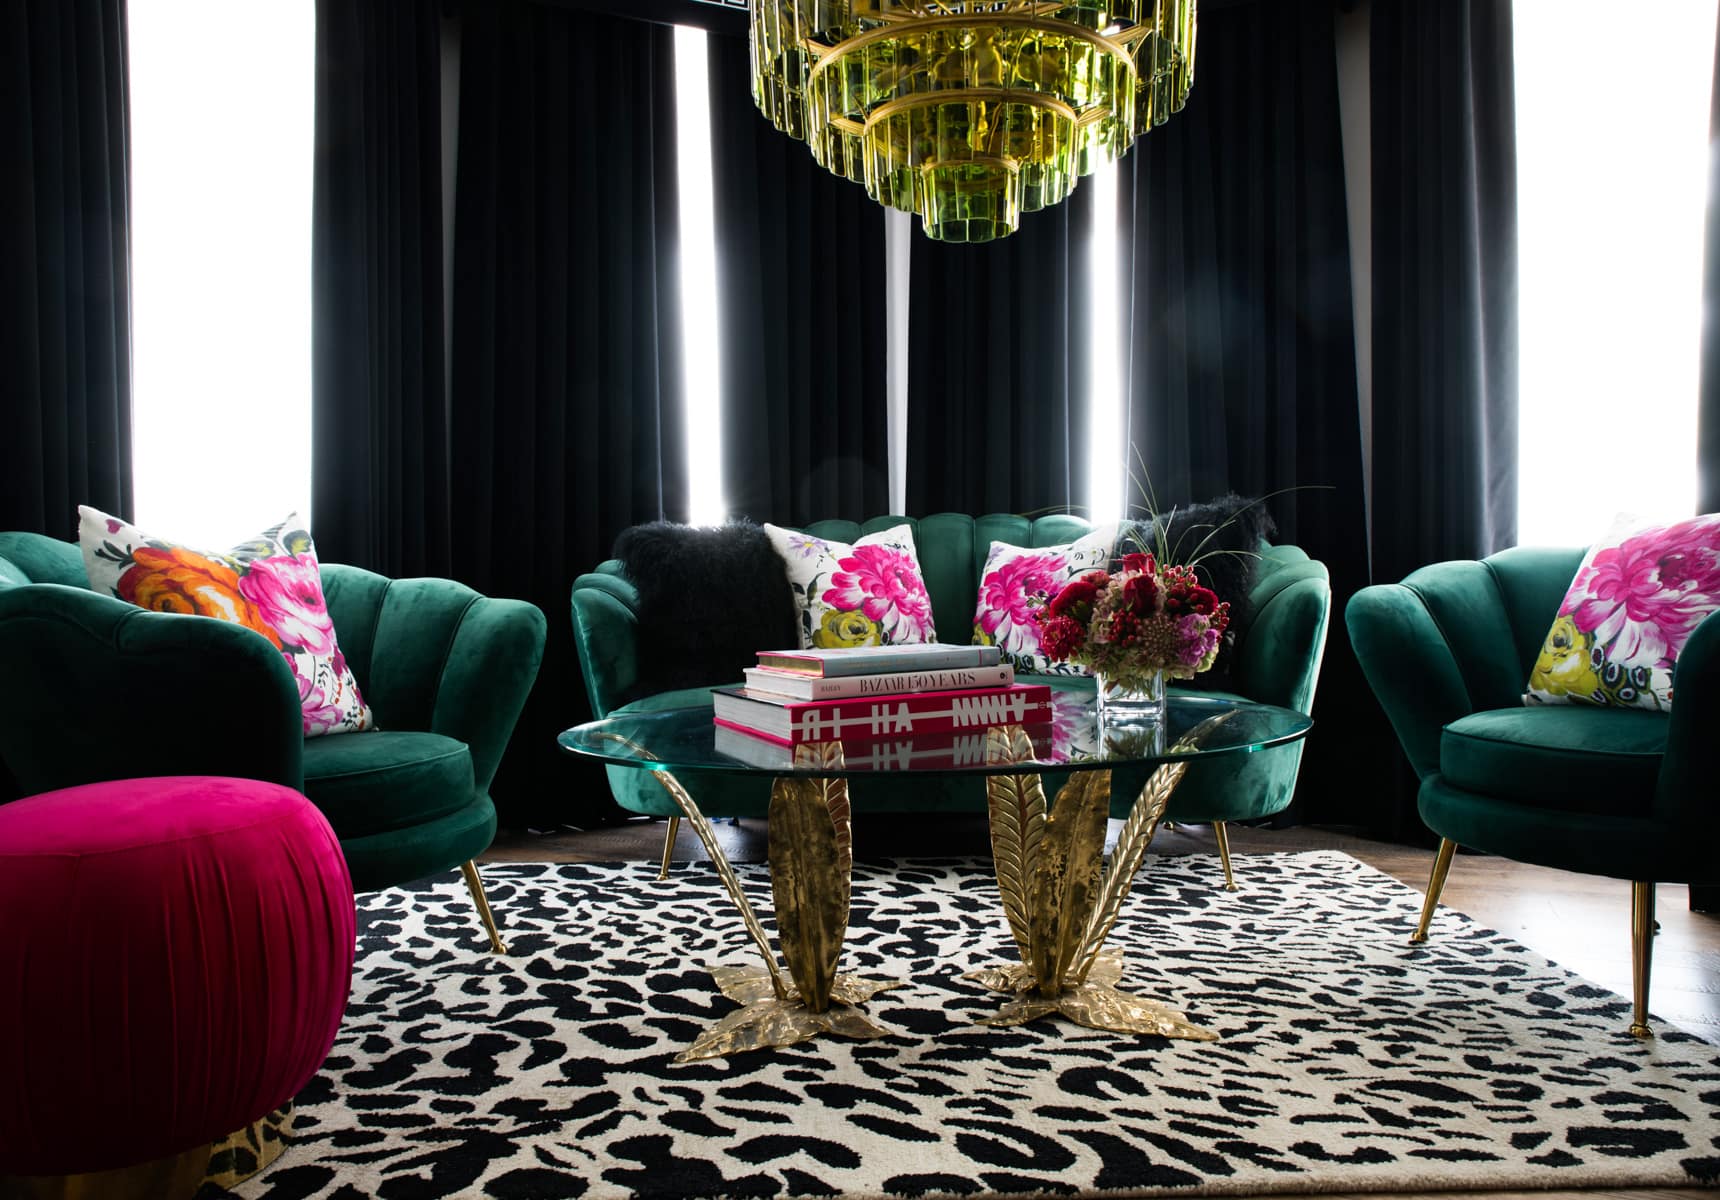 Seating area for 5 with a glass table on a animal print area rug with a green glass chandelier and dark ceiling to floor curtains